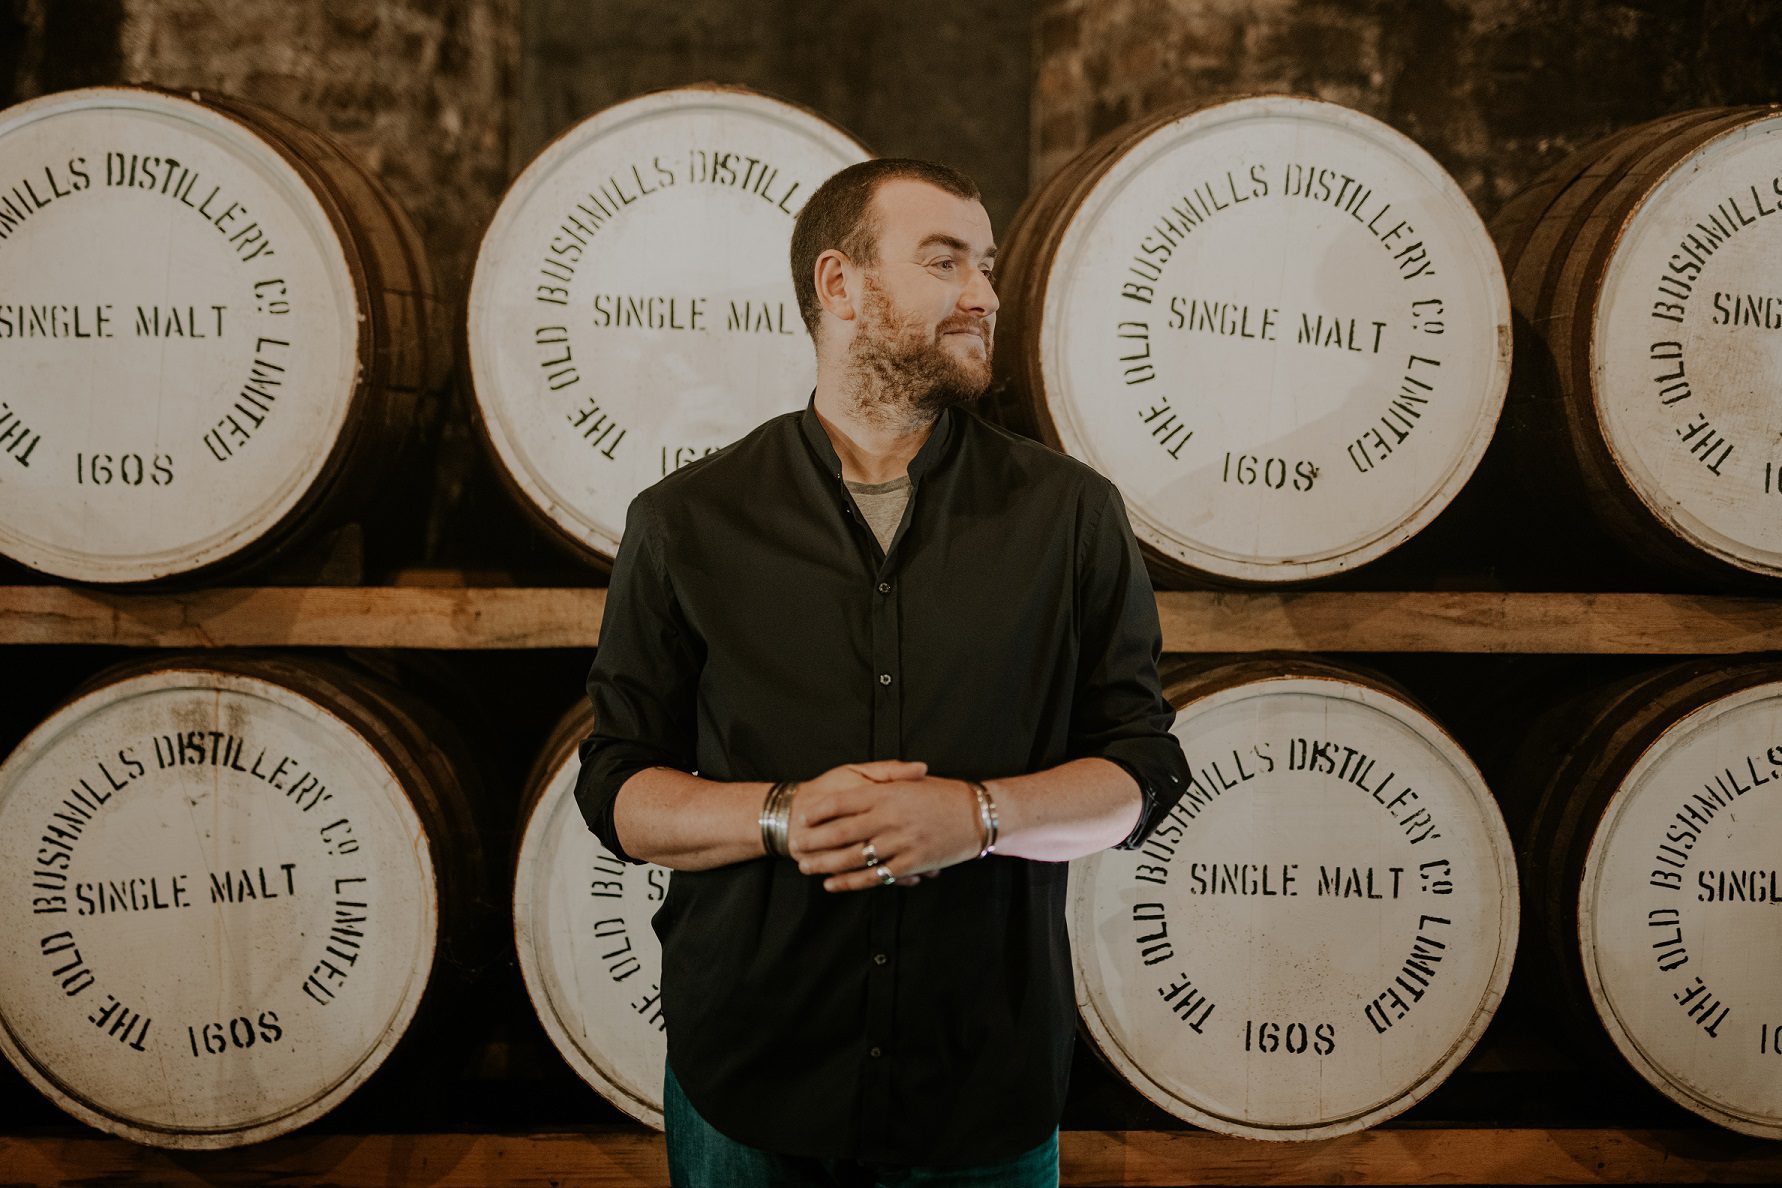 nbsp- Bushmills Irish Whiskeyis set to make waves again with its new series of exclusive and elusive Single Malt Causeway Collection releases for 2021 - International Whiskey Reviews by Irish Whiskey Blogger Stuart McNamara